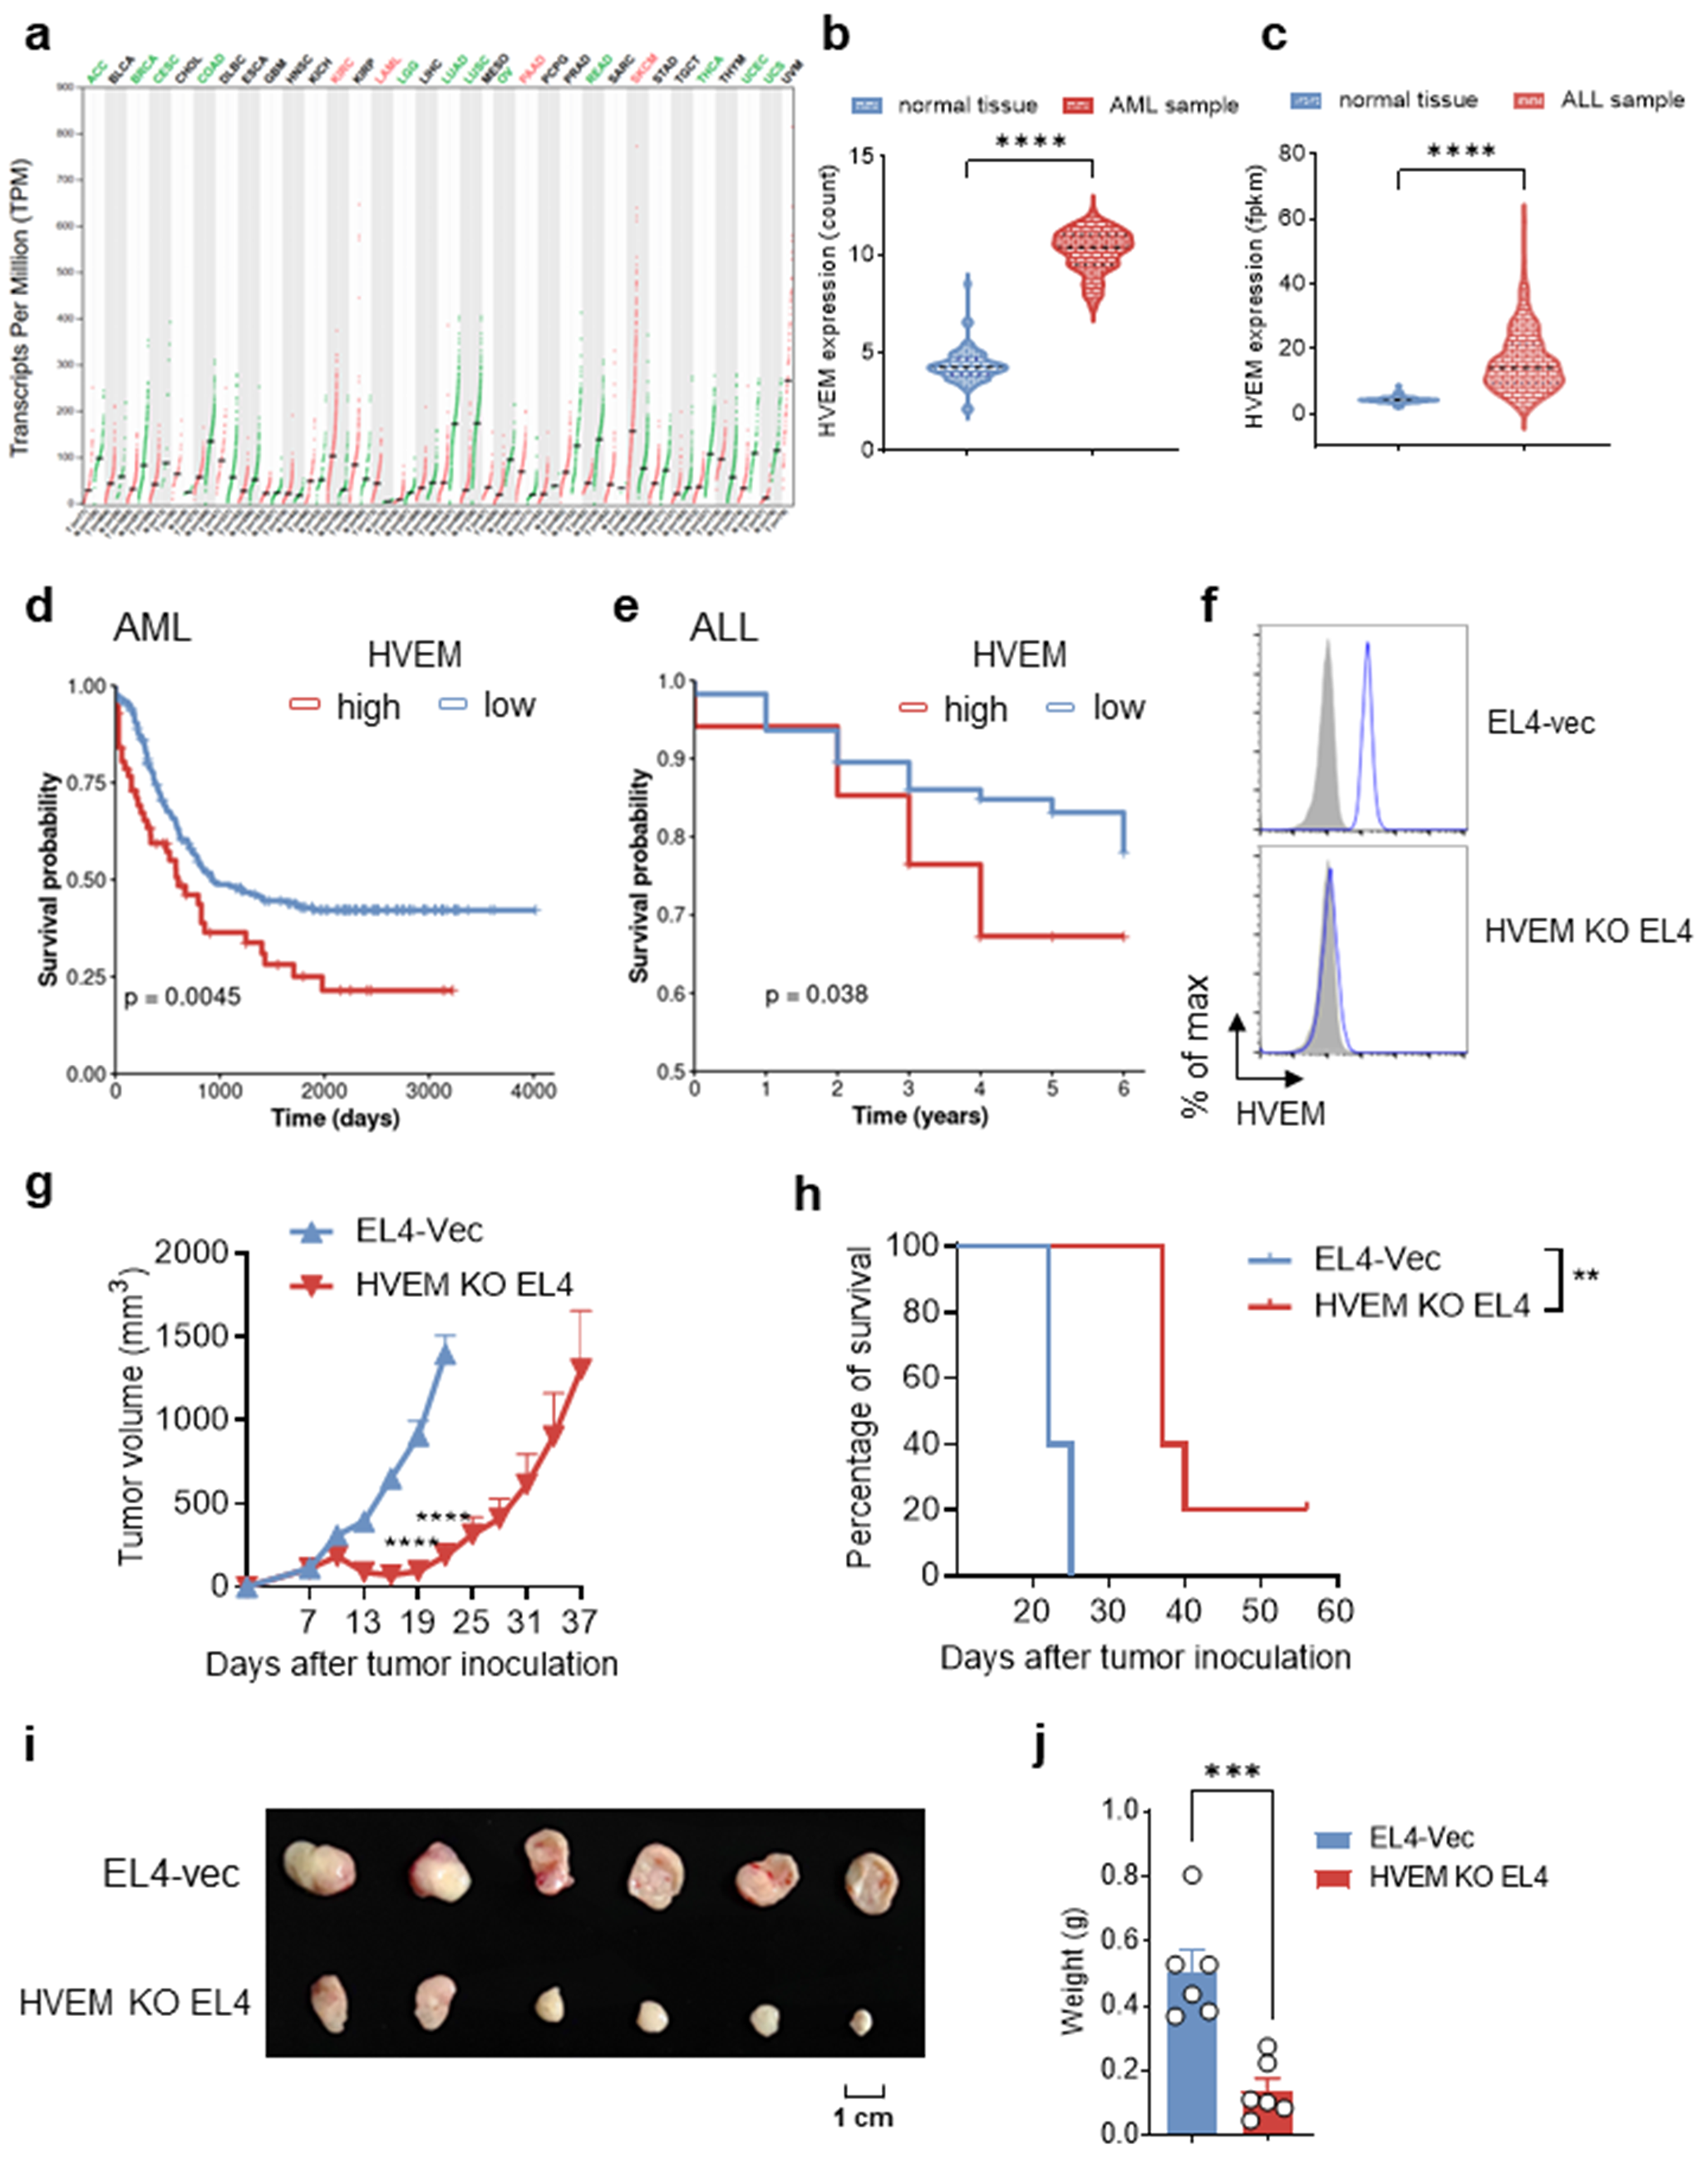 HVEM in acute lymphocytic leukemia facilitates tumour immune escape by inhibiting CD8+ T cell function